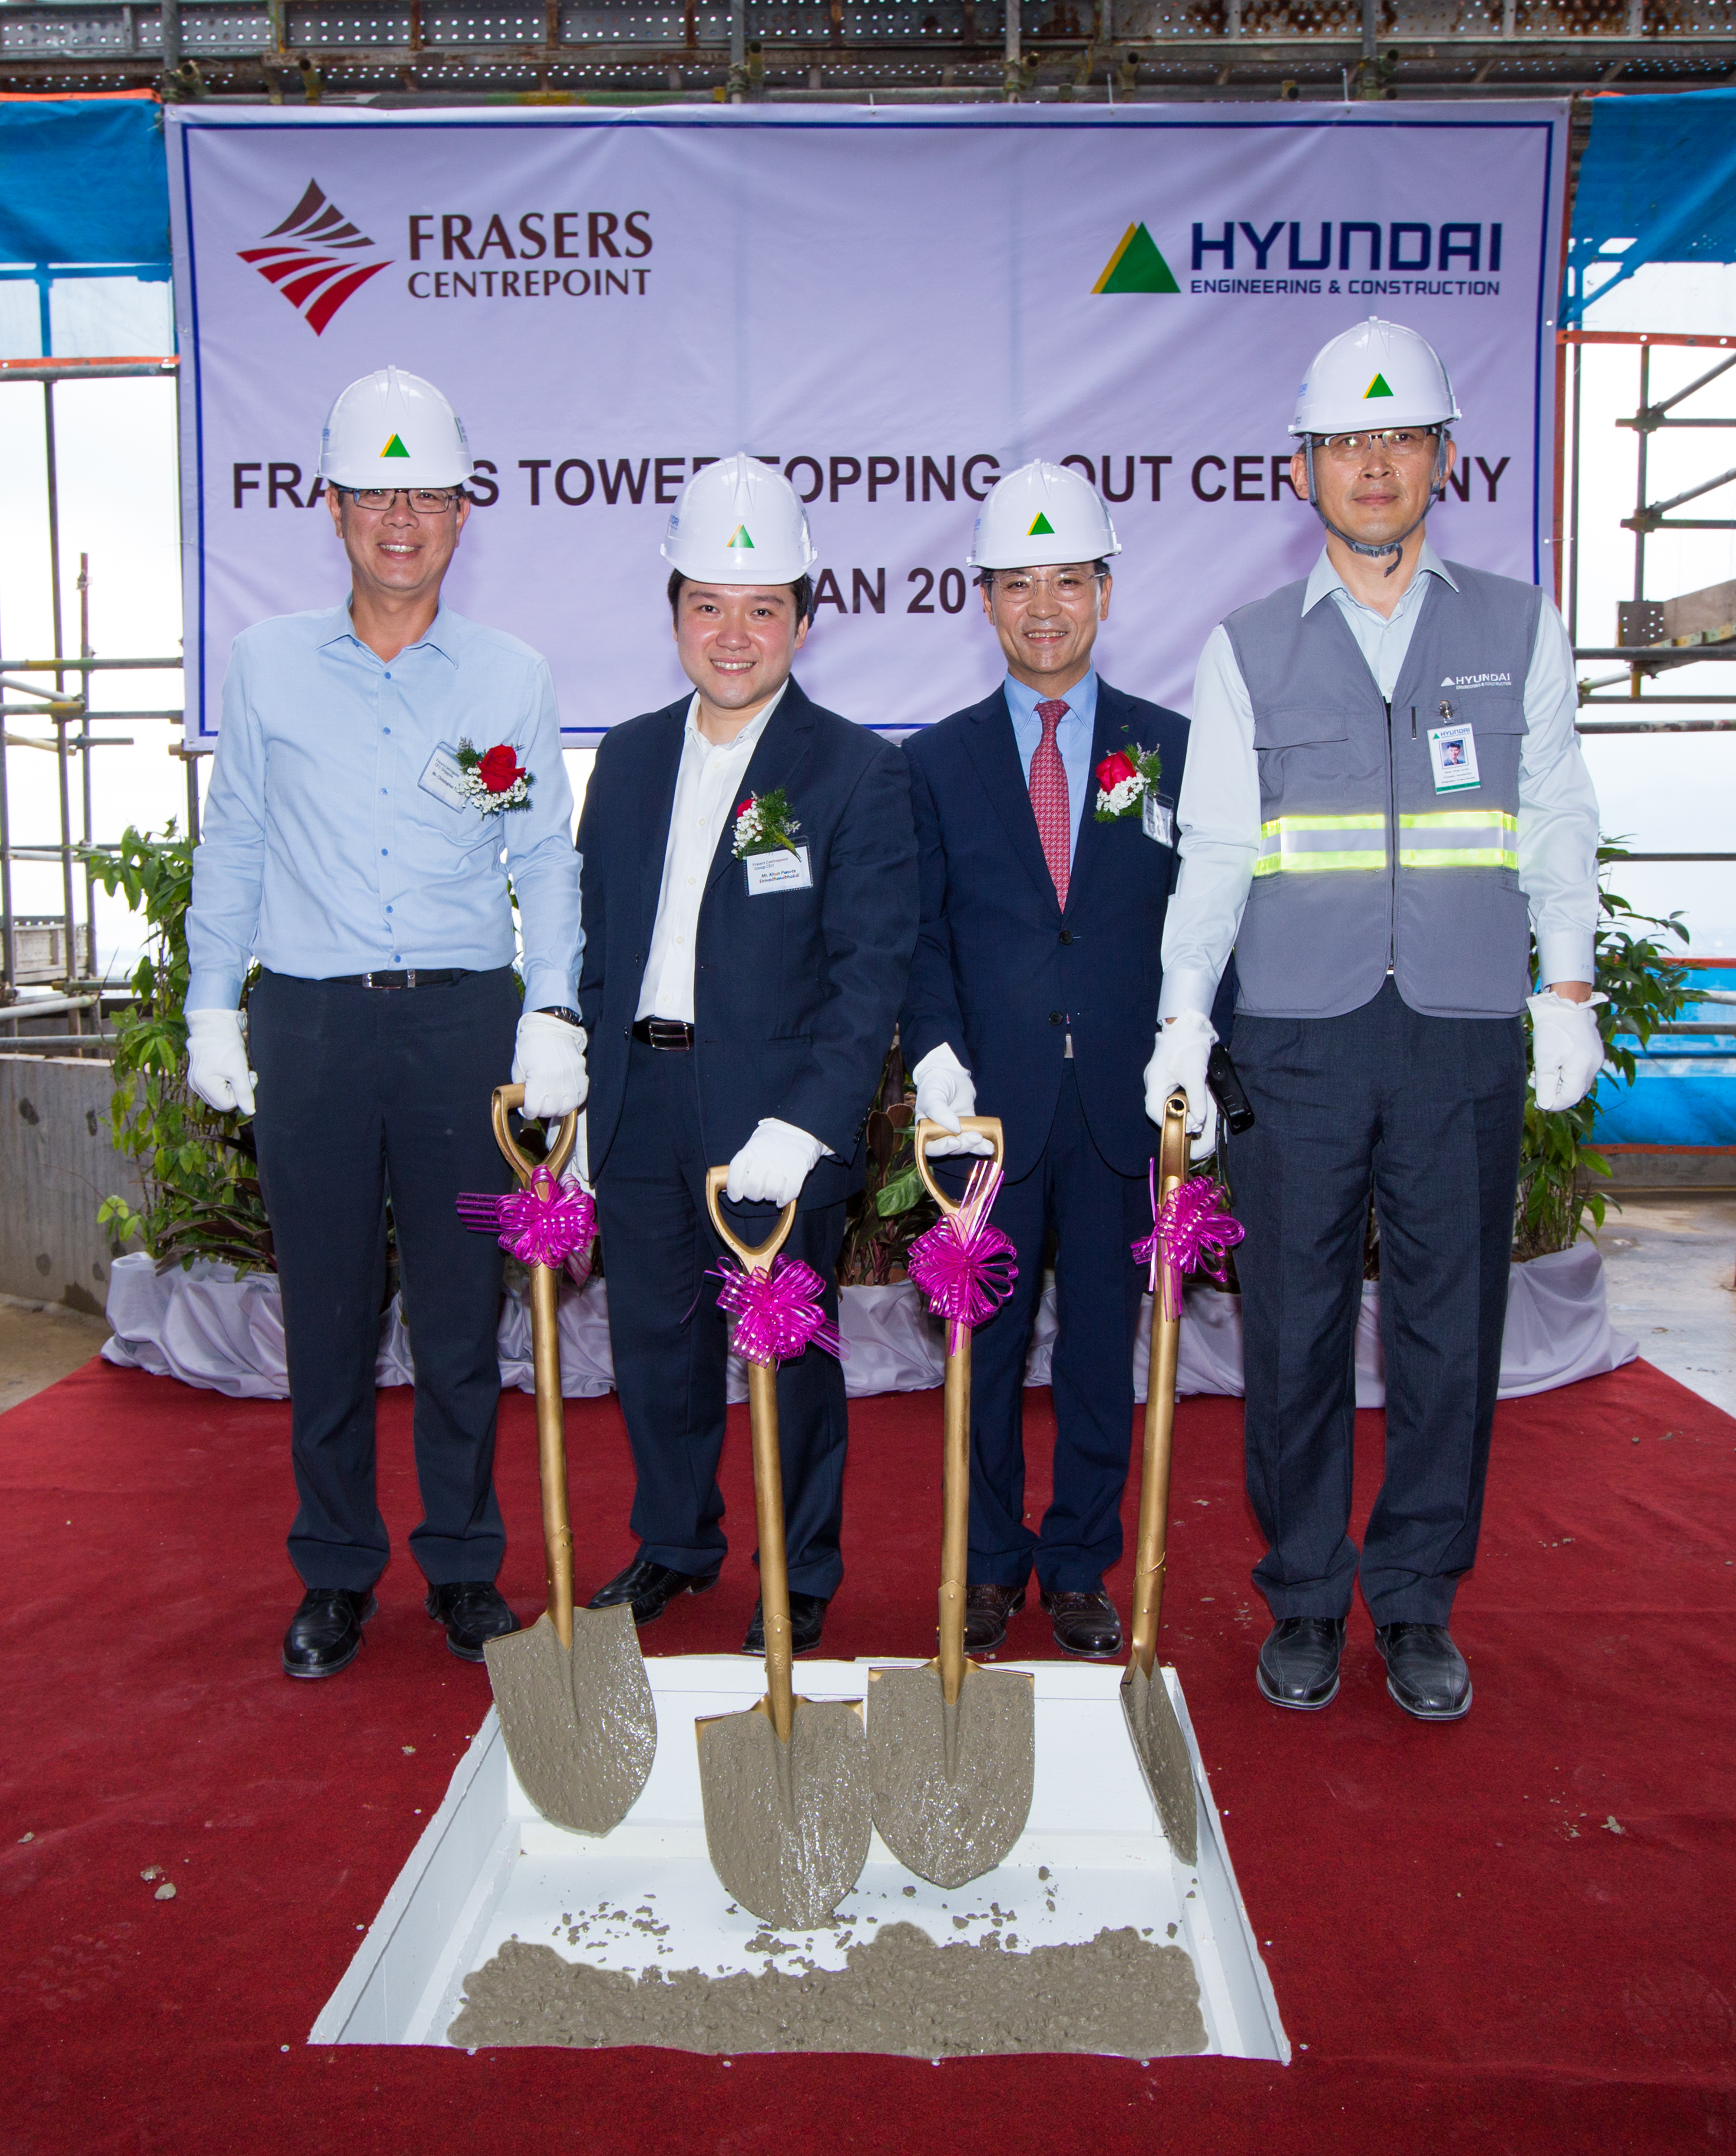 From left to right, Mr Christopher Tang – CEO, Frasers Centrepoint Singapore, Mr Panote Sirivadhanabhakdi – Group CEO, Frasers Centrepoint Limited, Mr Kim Jung Chul – EVP / COO / Head of Building Works Division, Hyundai Engineering & Construction and Mr Kwak Im Koo, Project Director, Hyundai Engineering & Construction